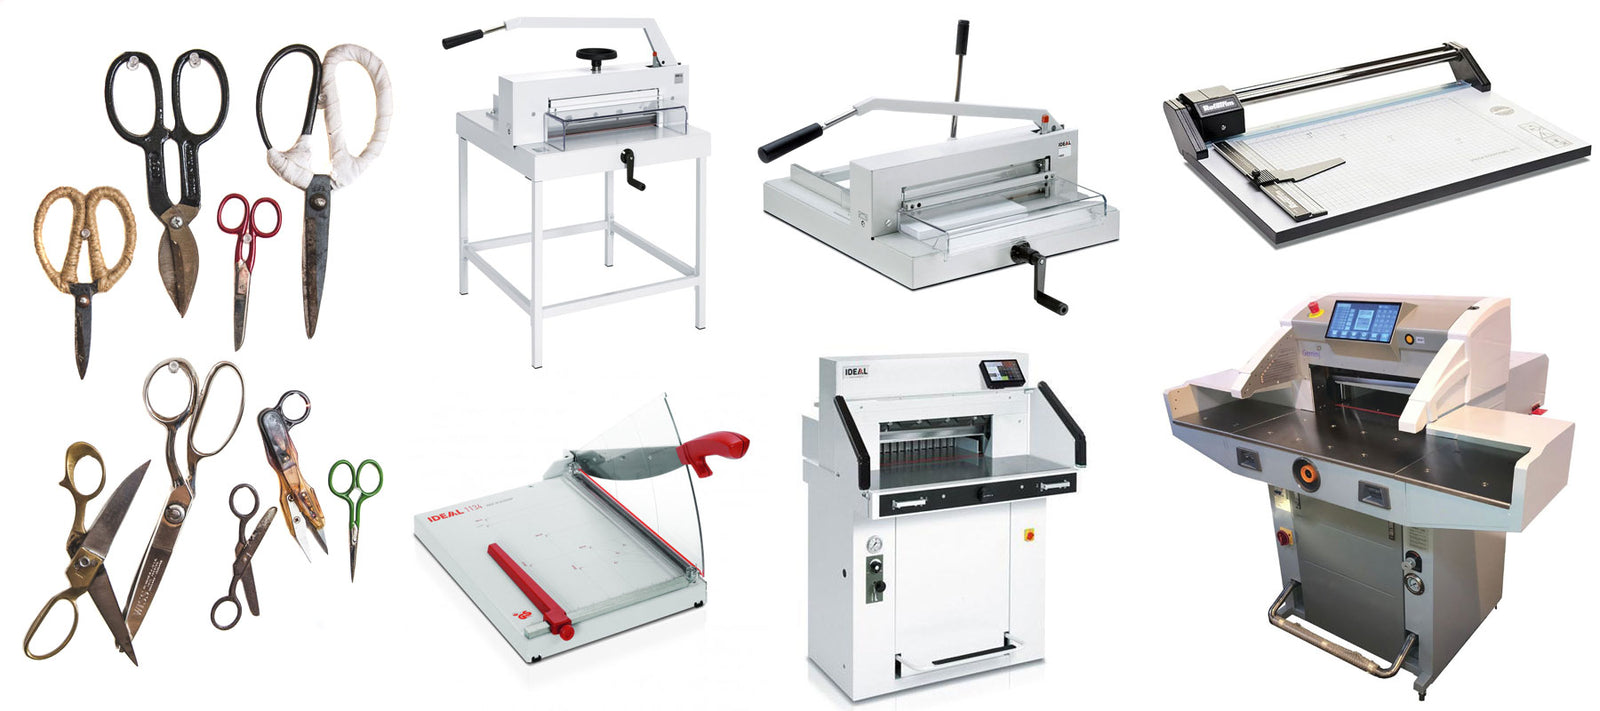 Rotary Trimmers, Paper Trimmers & Guillotines....What's the difference?